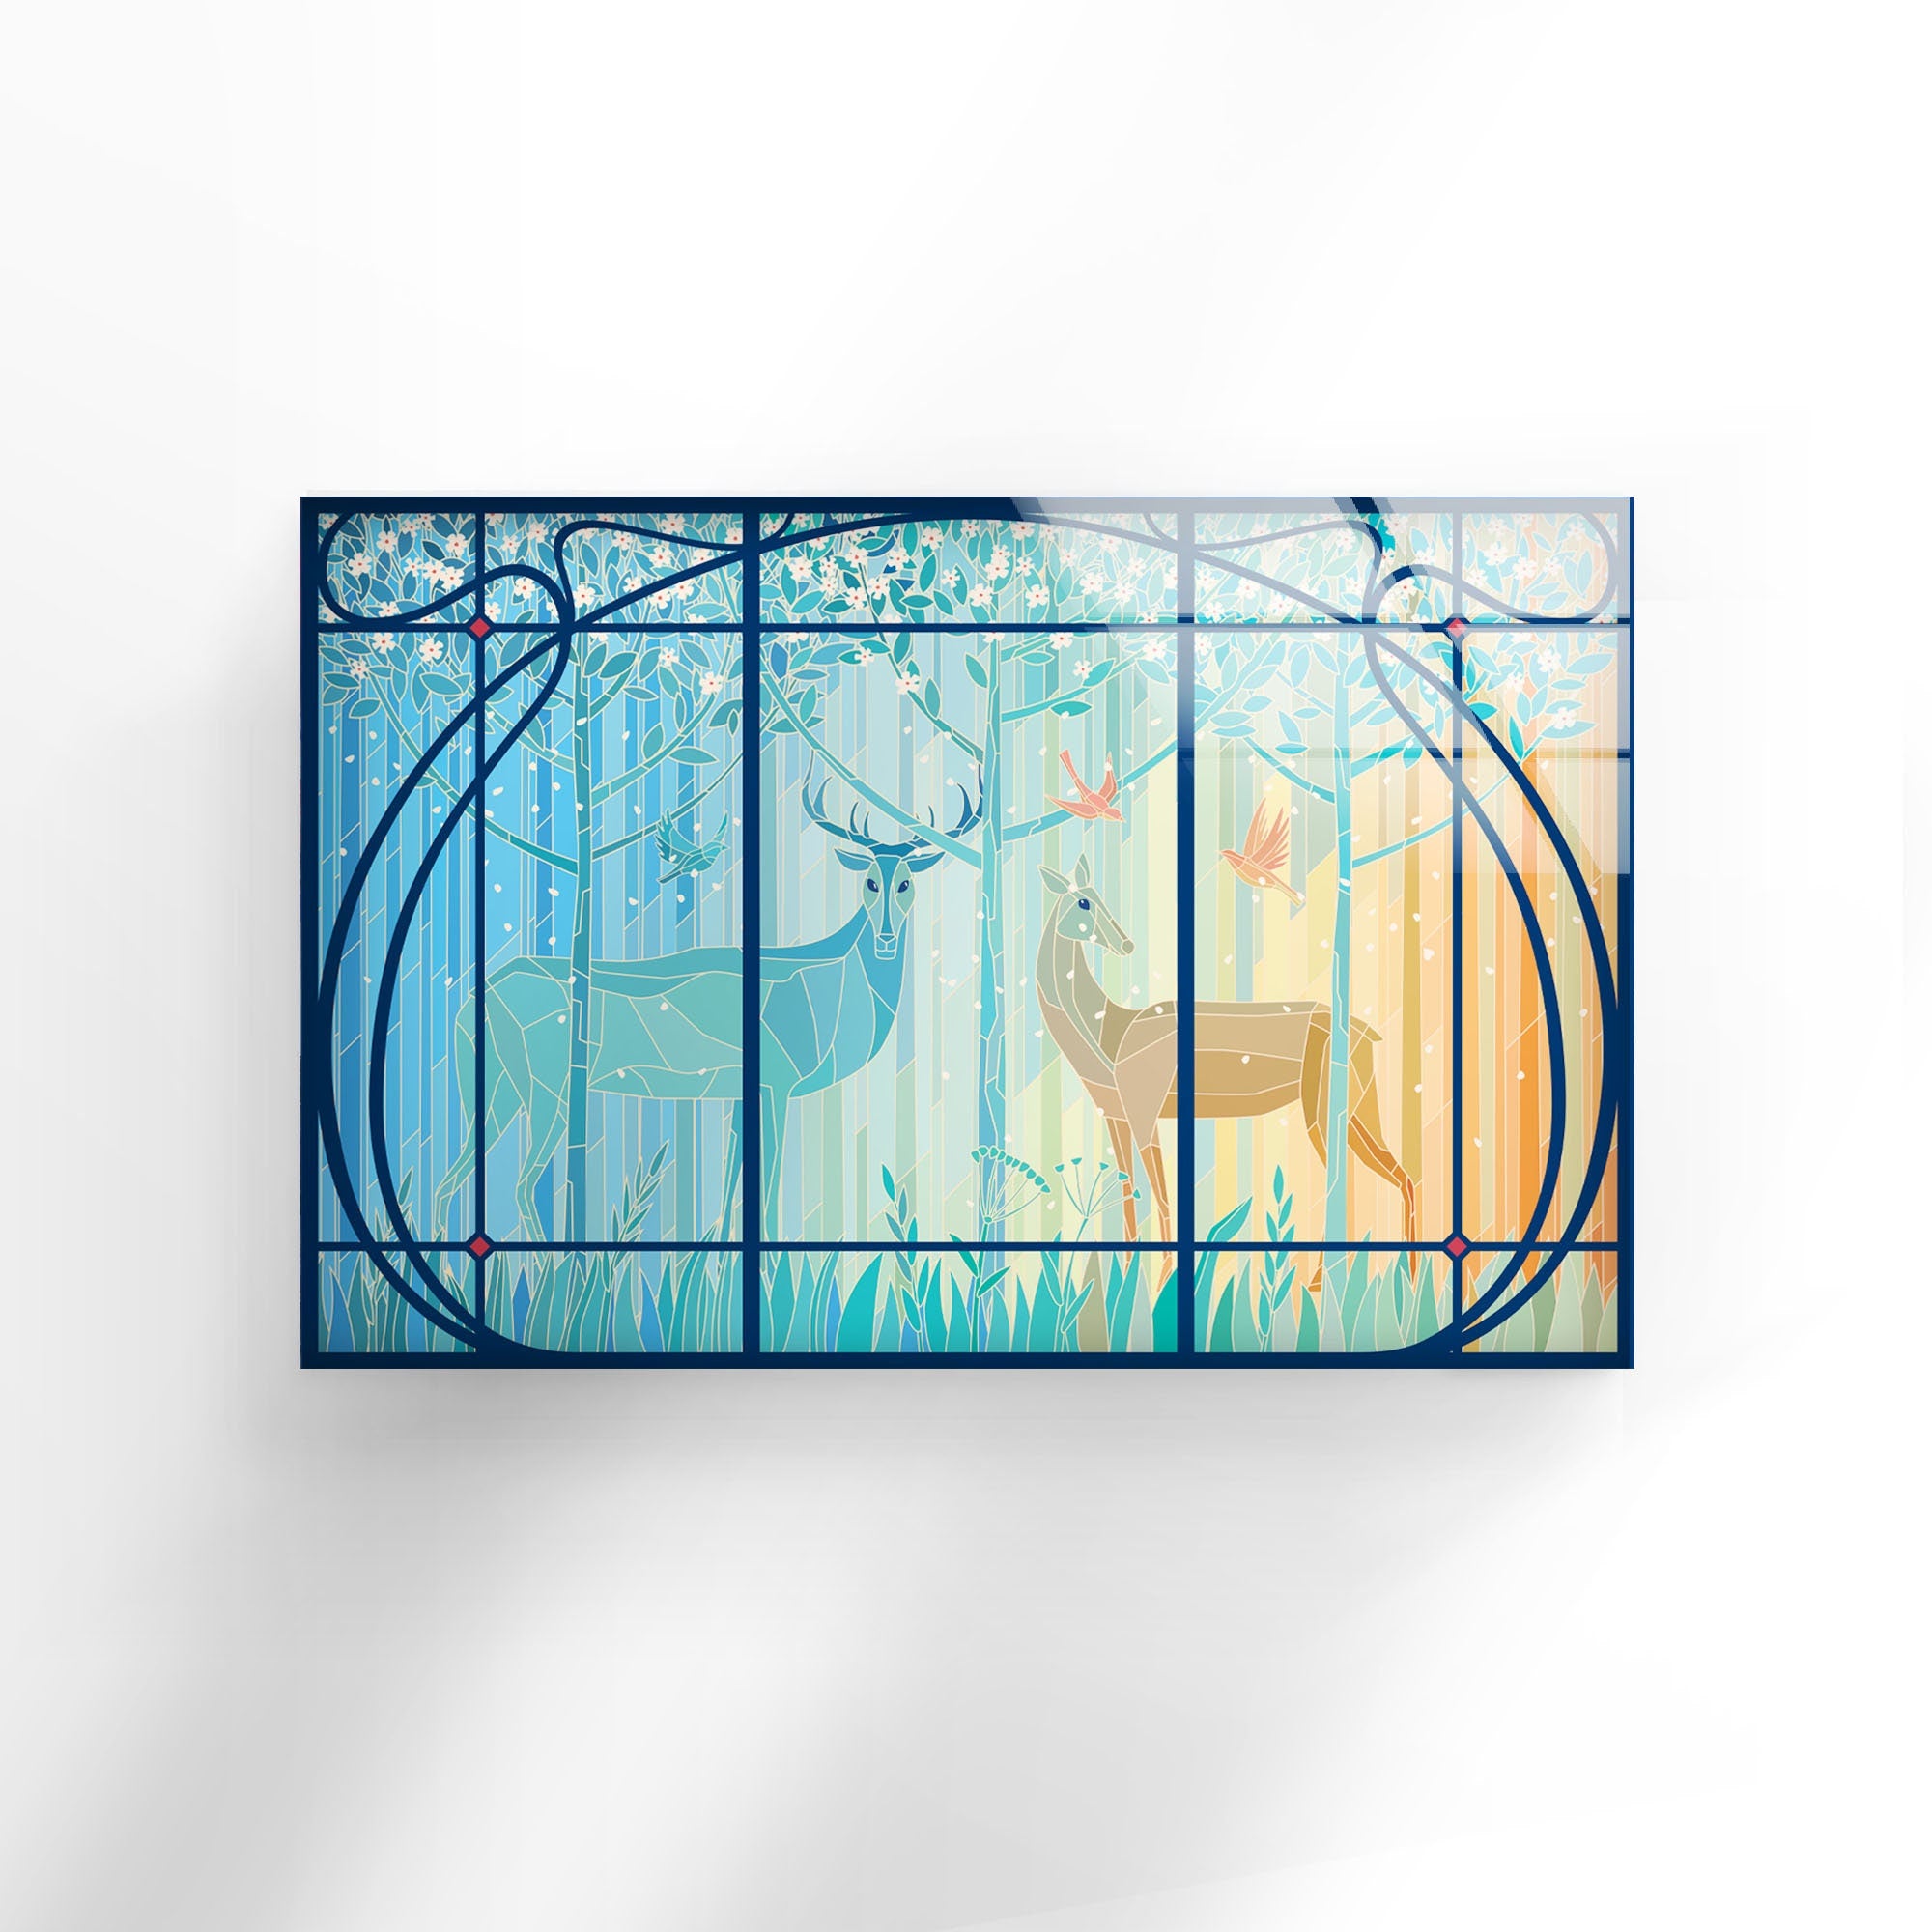 Deer Gazelle Stained Tempered Glass Wall Art